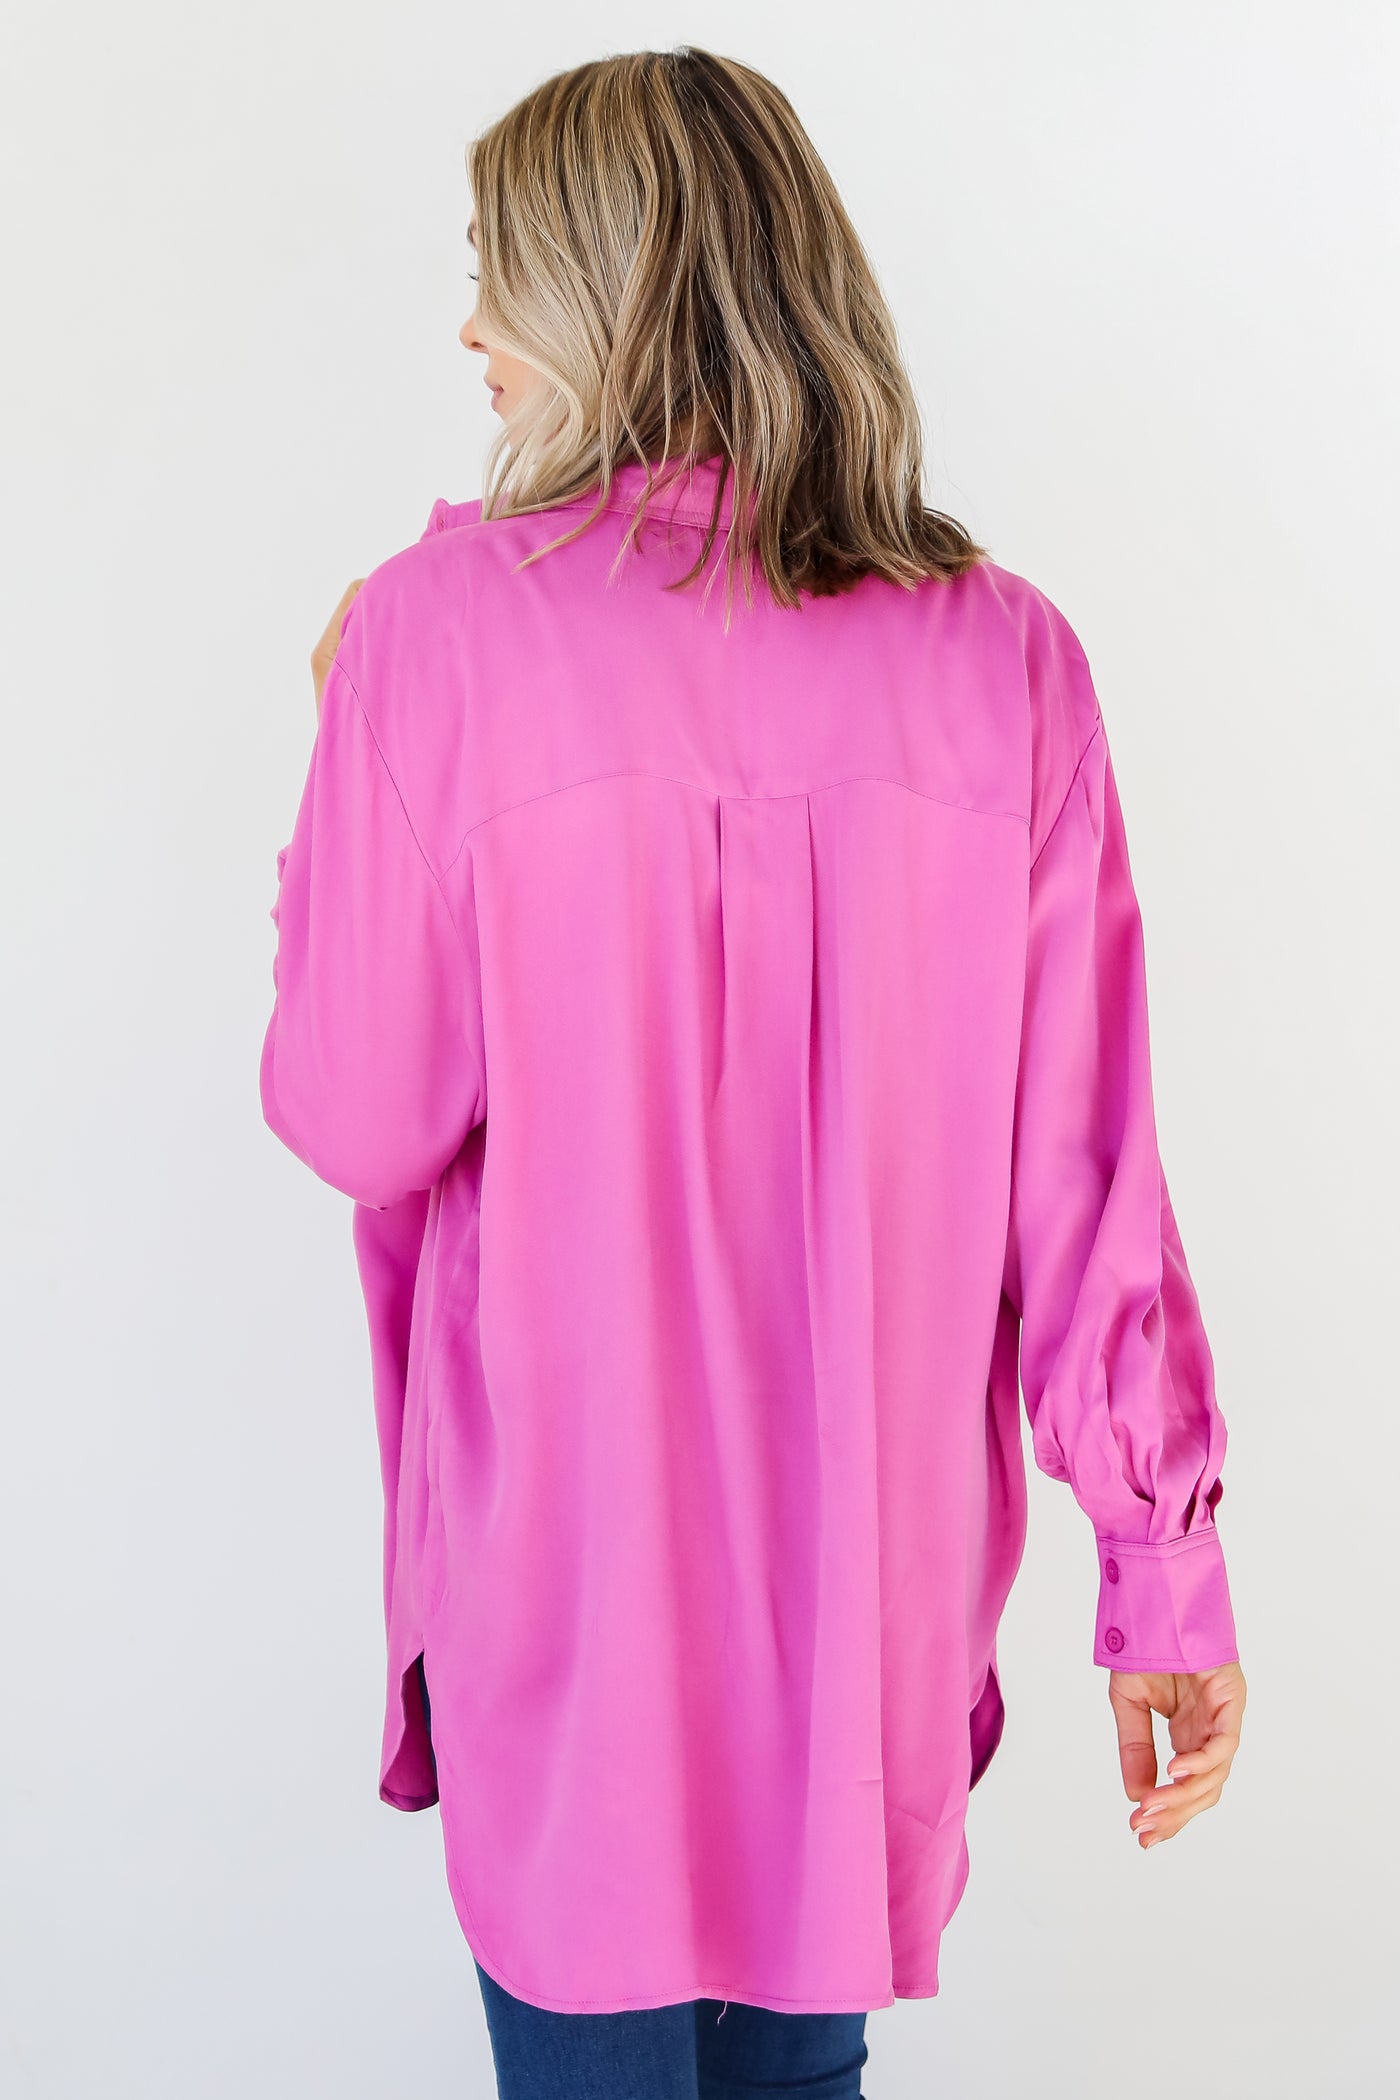 hot pink Button-Up Blouse back view